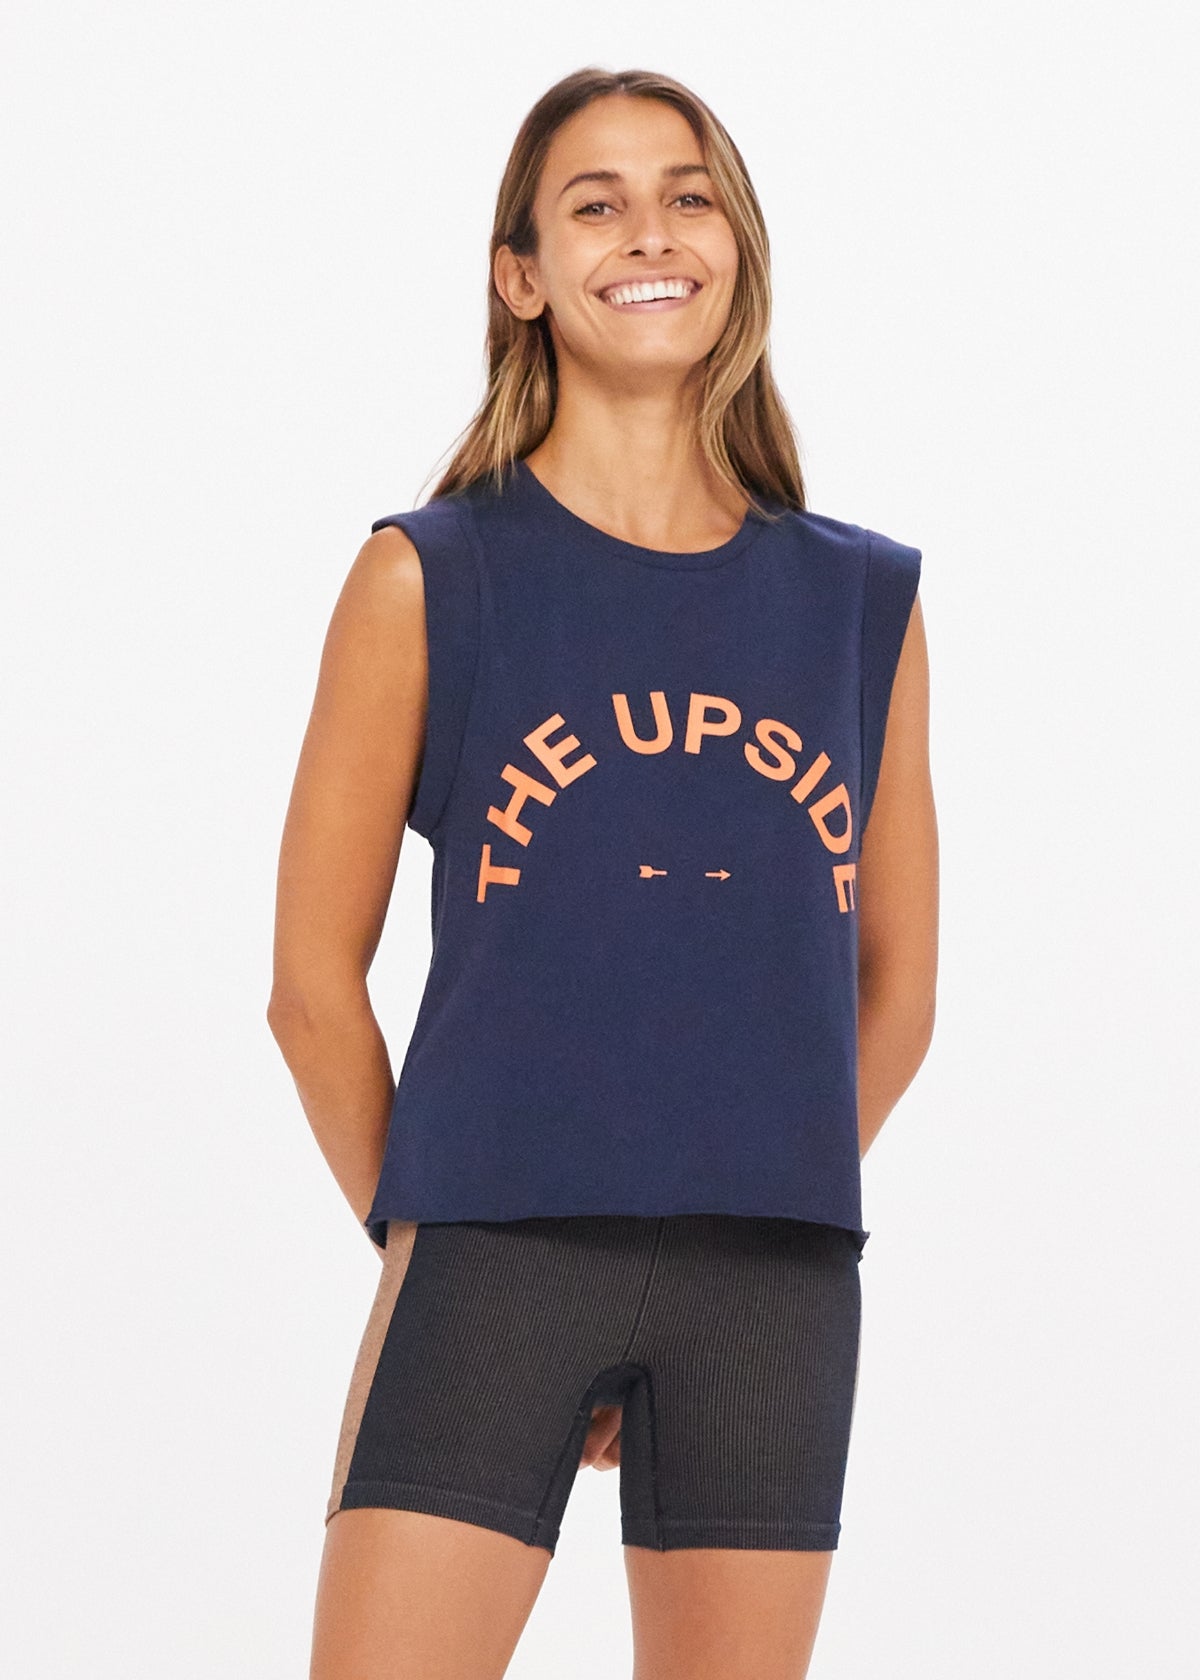 Cropped Muscle Tank Navy - Tops